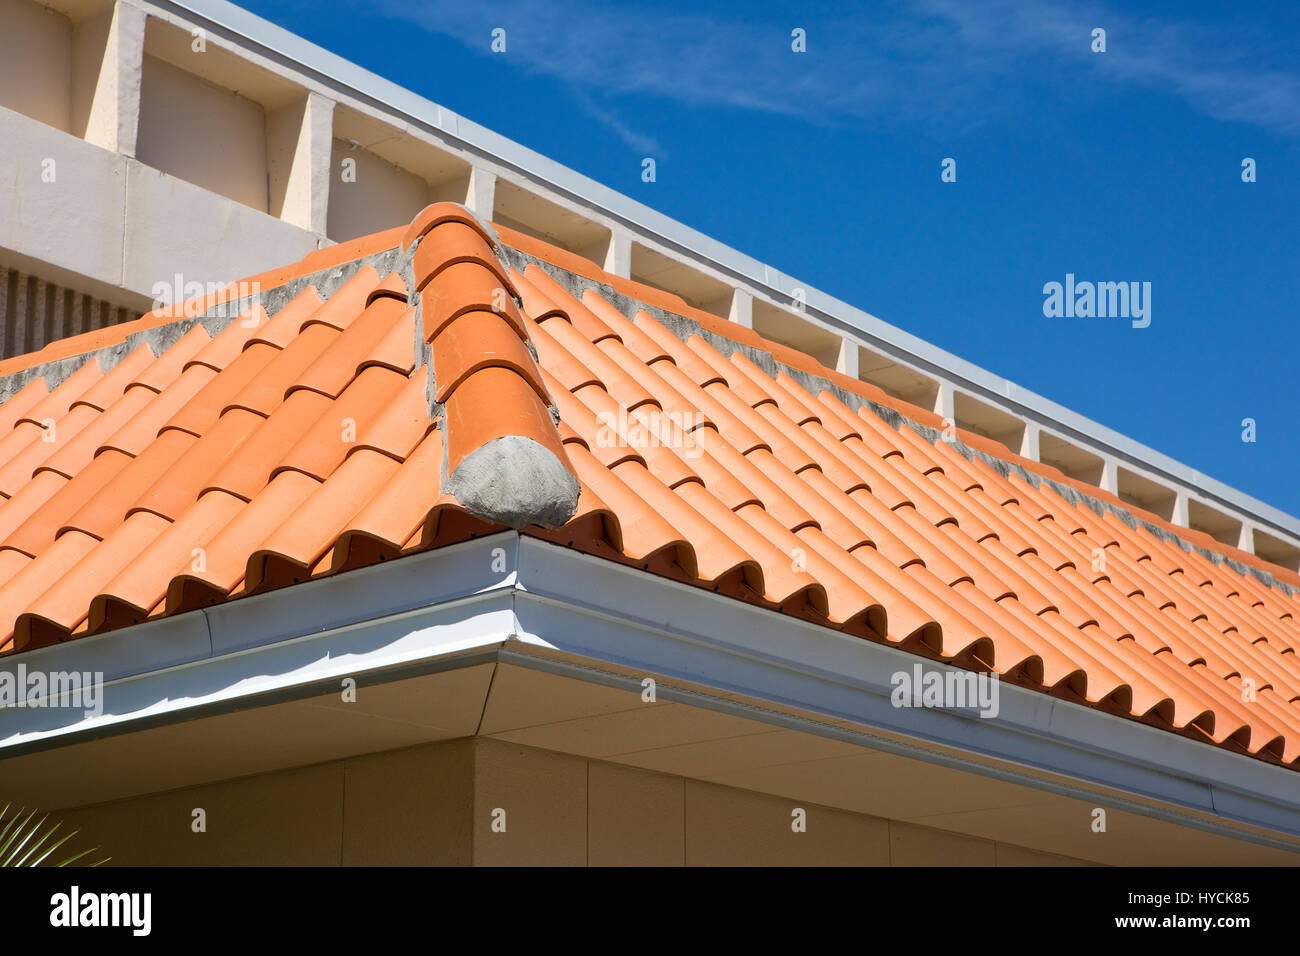 Detail of an overlapped barrel tile roof with cement mortared joints. Stock Photo